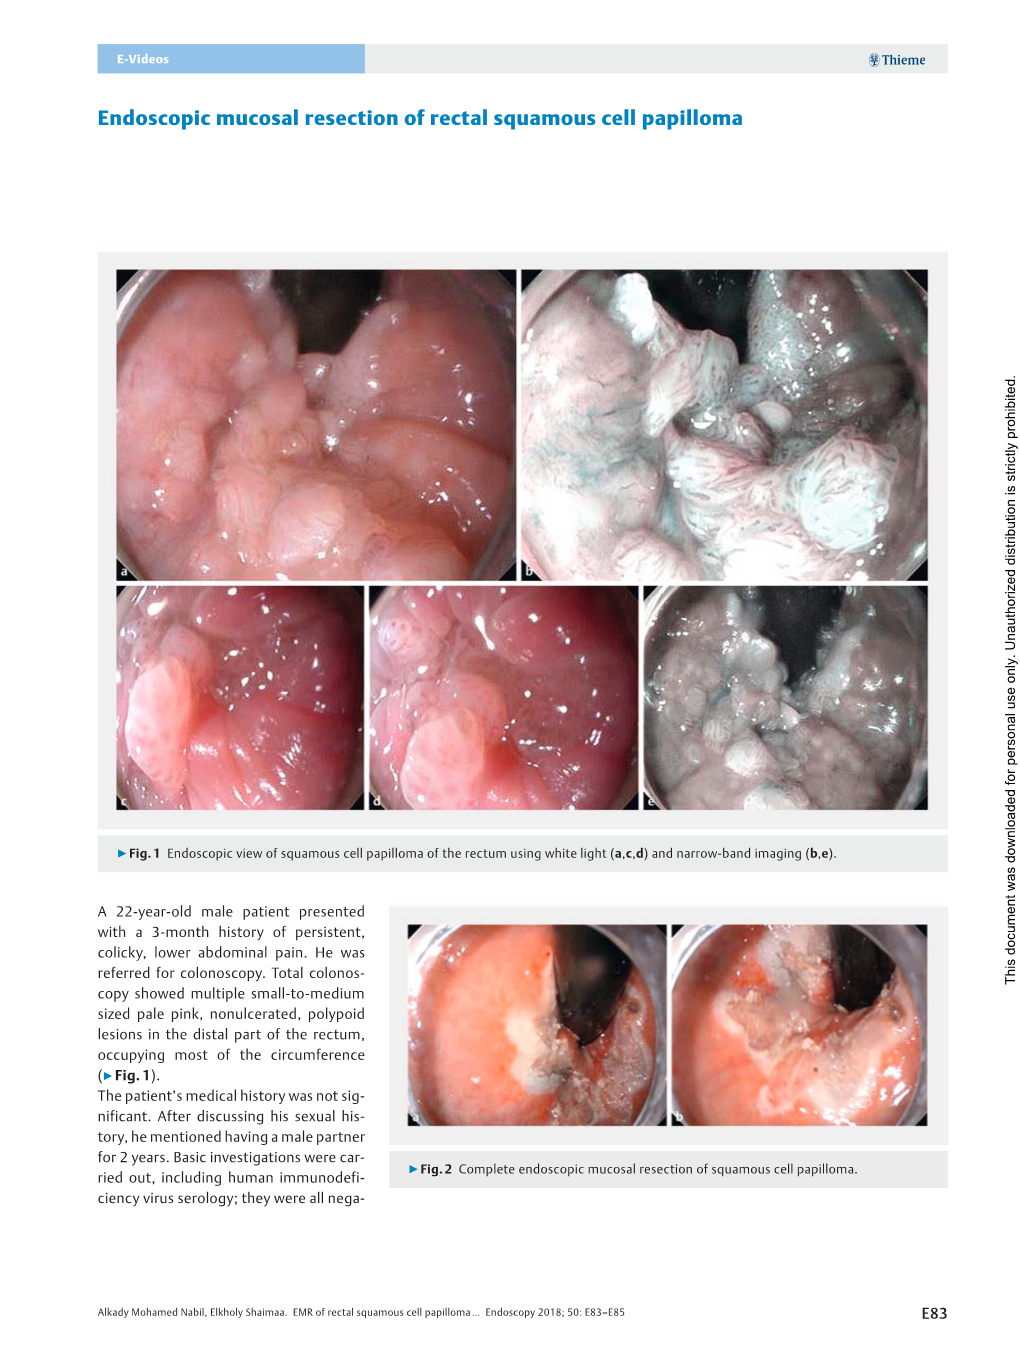 Endoscopic Mucosal Resection of Rectal Squamous Cell Papilloma